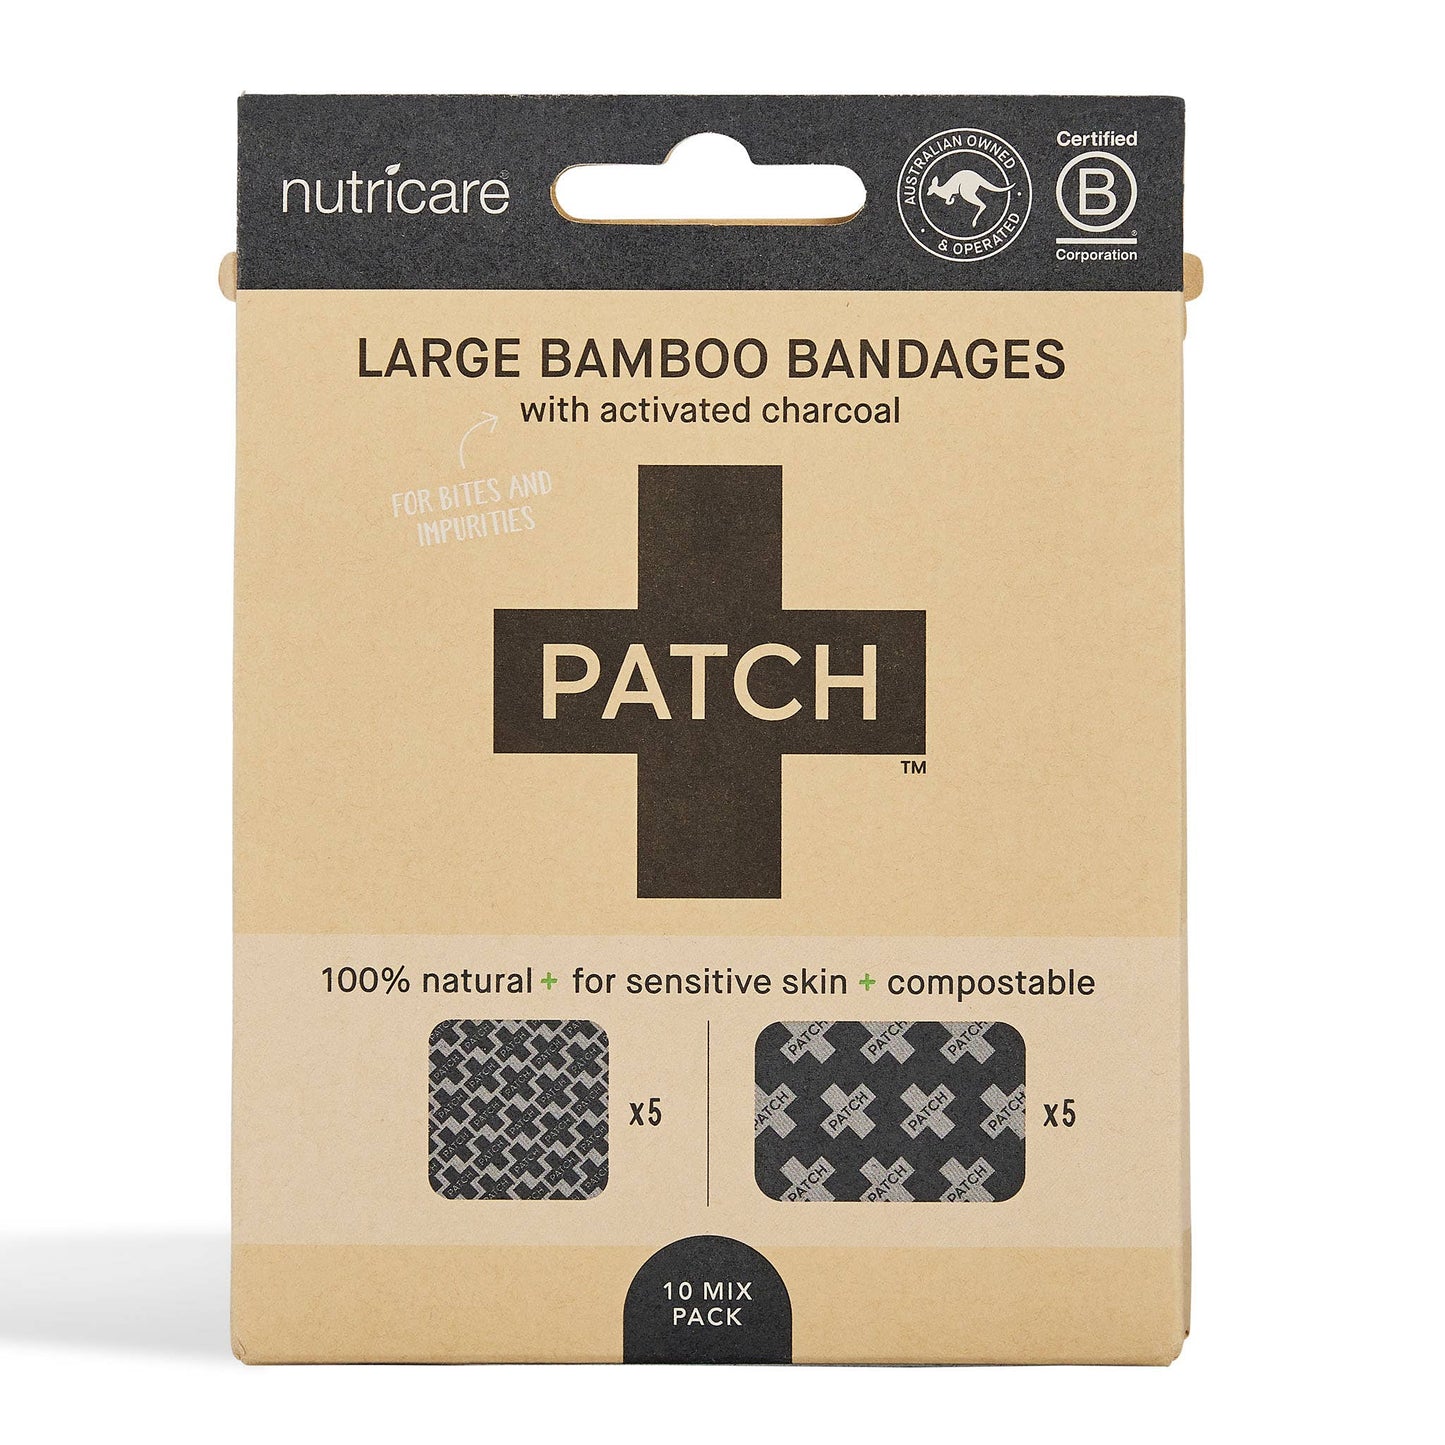 Patch Bamboo Bandages - Activated Charcoal Large Bandages